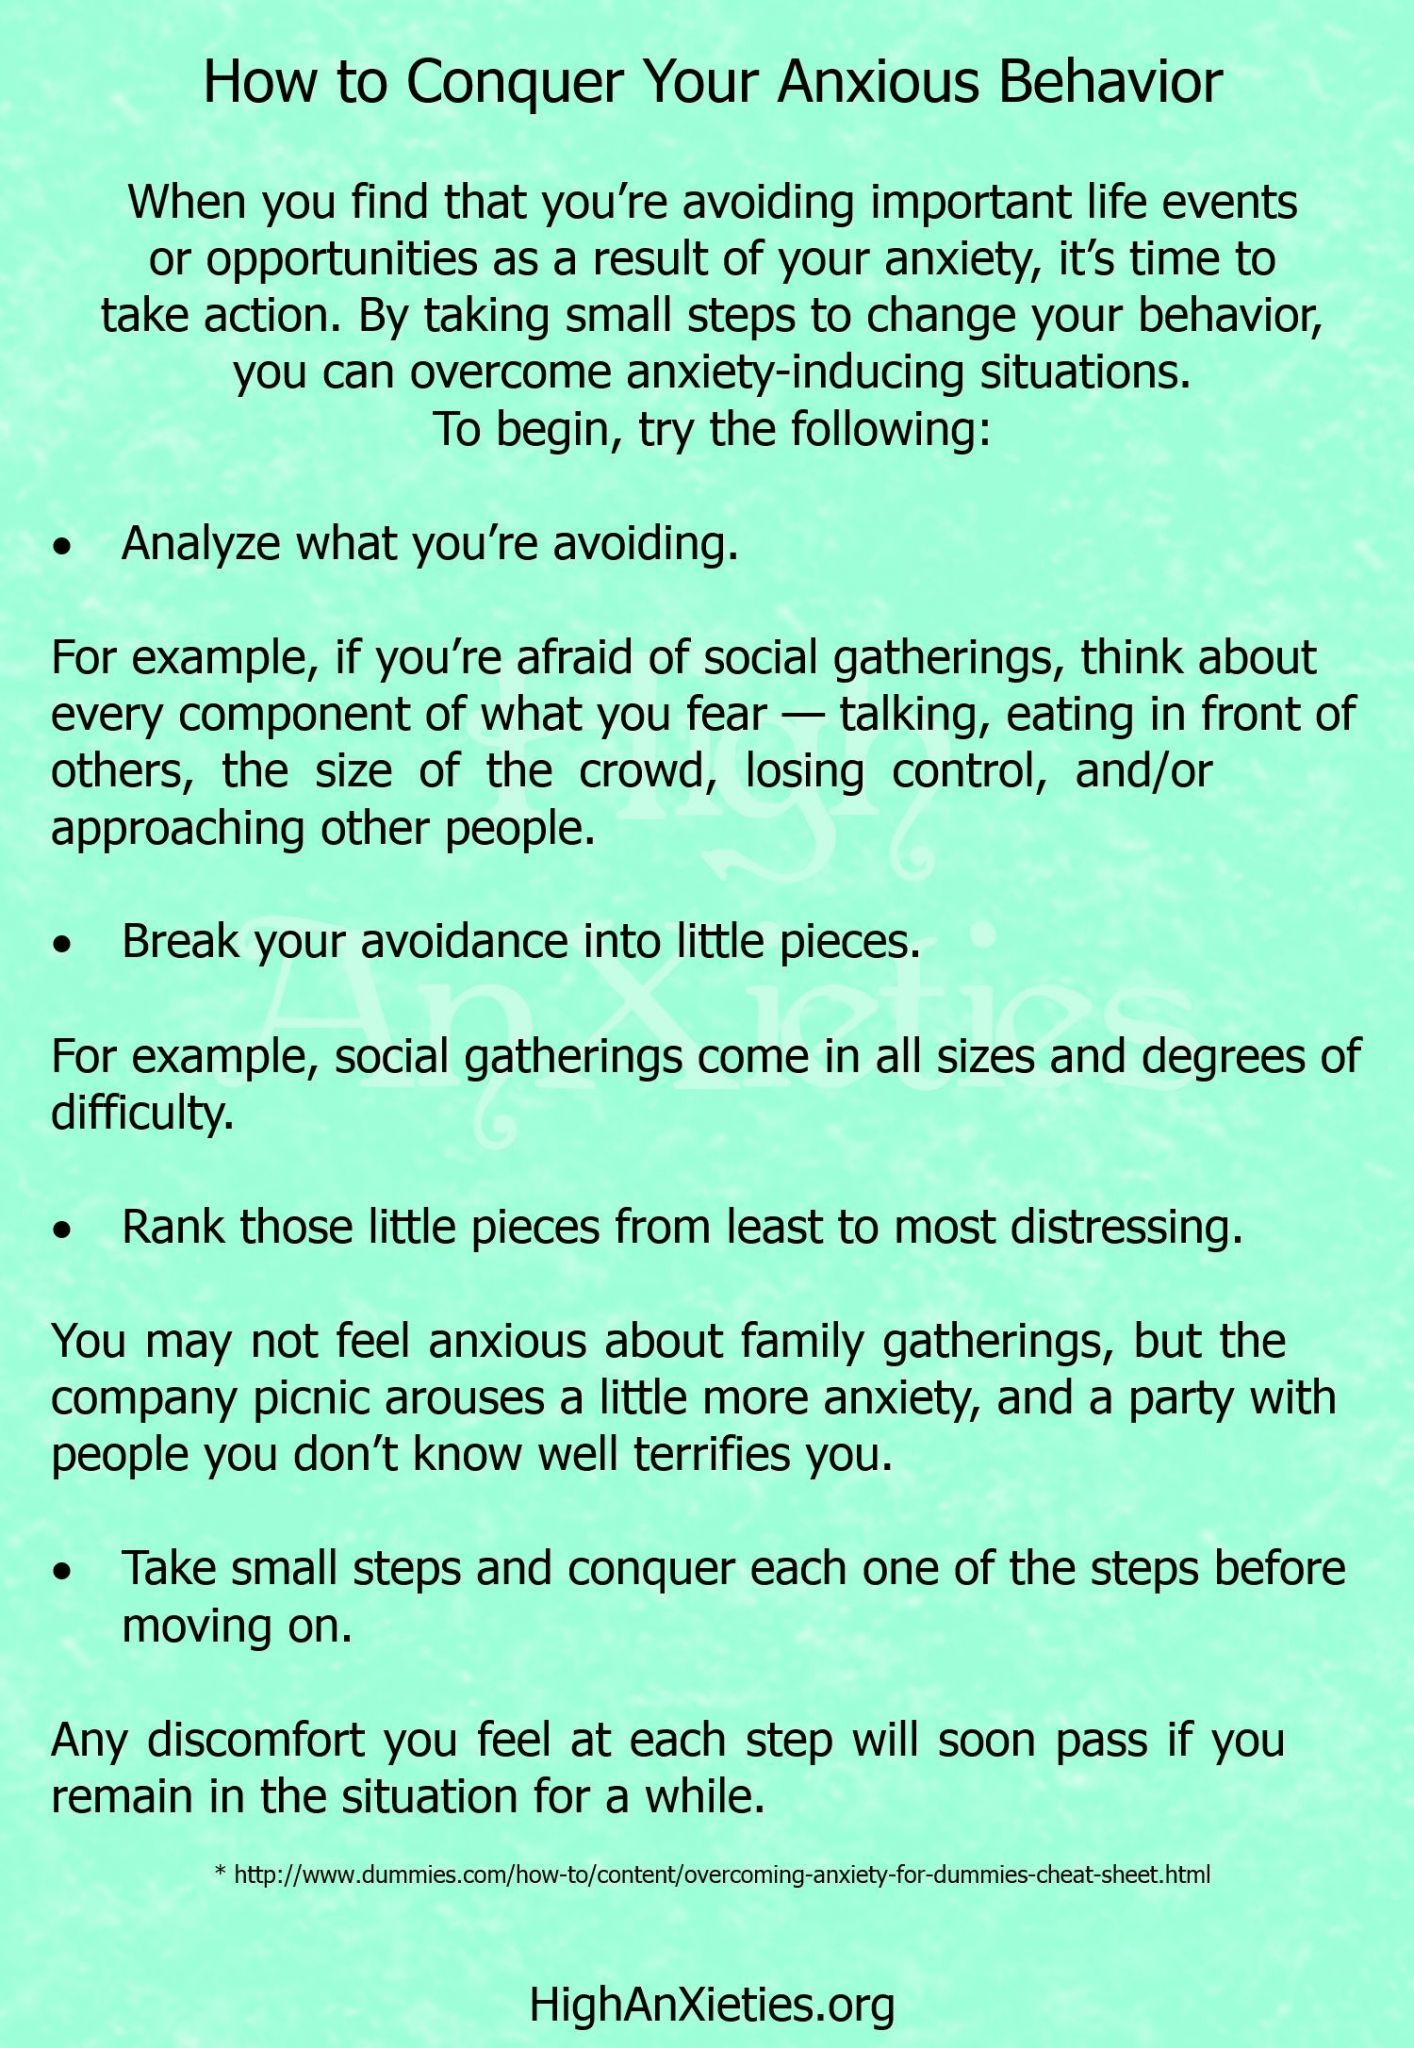 Coping Skills For Anxiety Worksheets